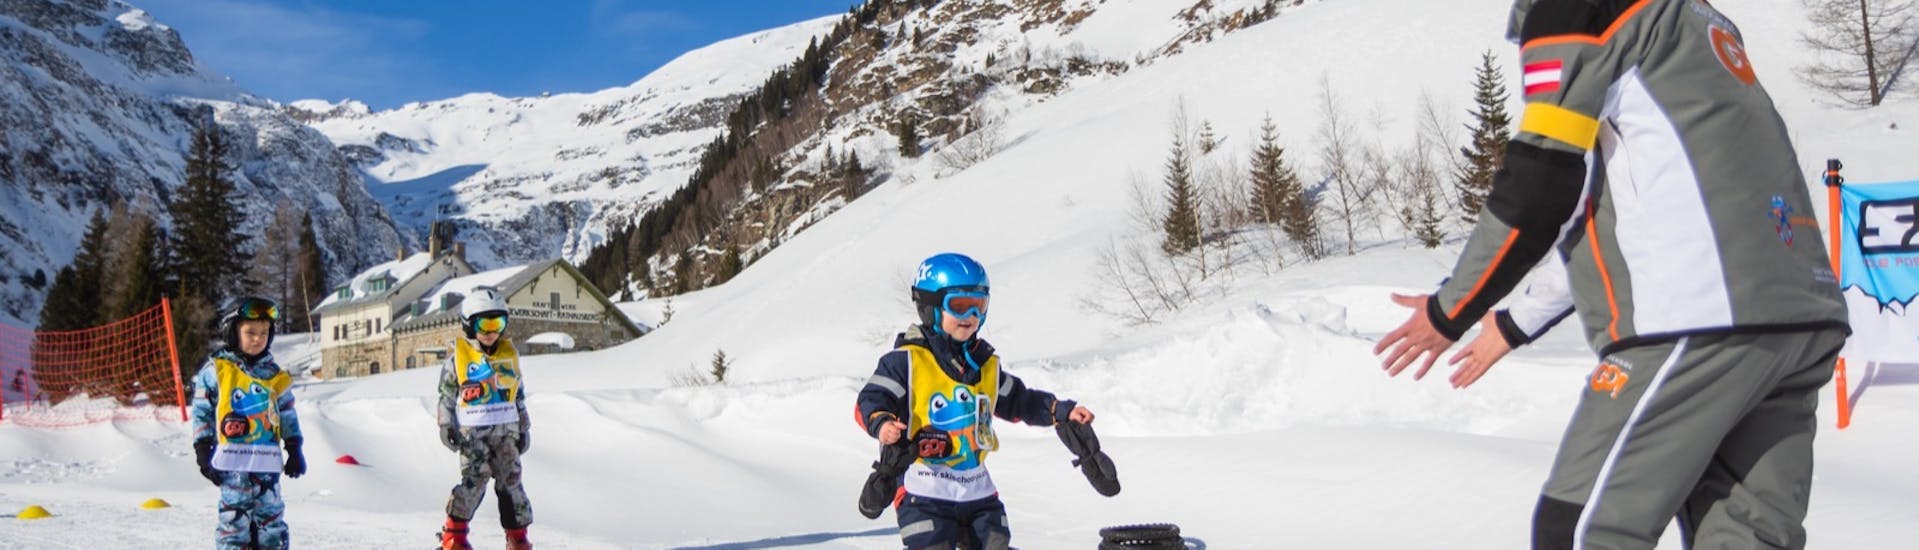 Kids Ski Lessons (4-14 y.) for Beginners.